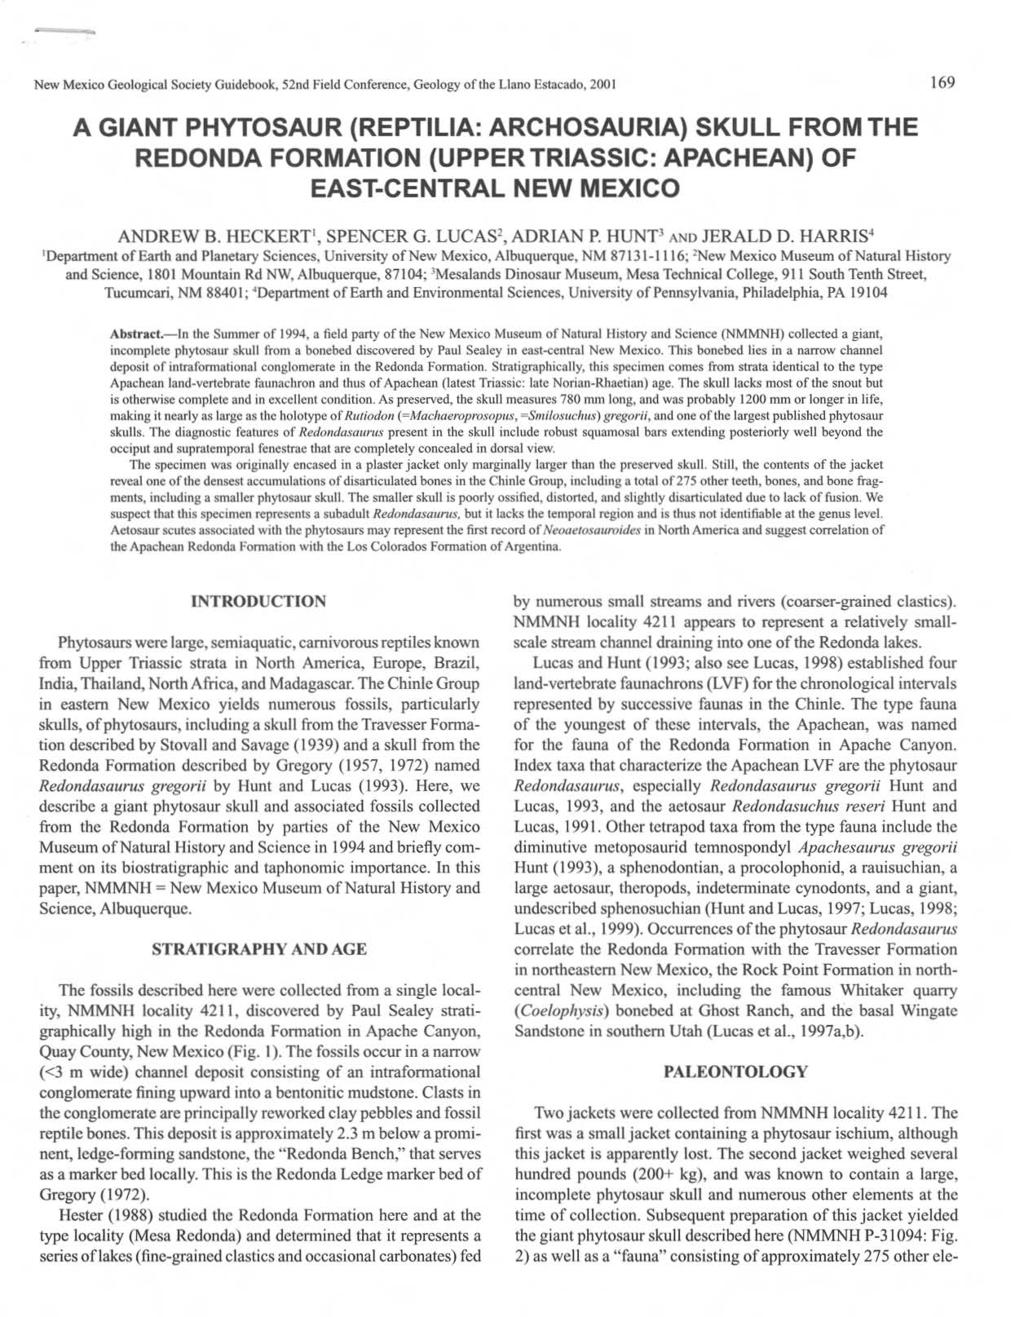 New Mexico Geological Society Guidebook, 52nd Field Conference, Geology of the LlallO Estacado, 2001 169 A GIANT PHYTOSAUR (REPTILIA: ARCHOSAURIA) SKULL FROM THE REDONDA FORMATION (UPPER TRIASSIC: